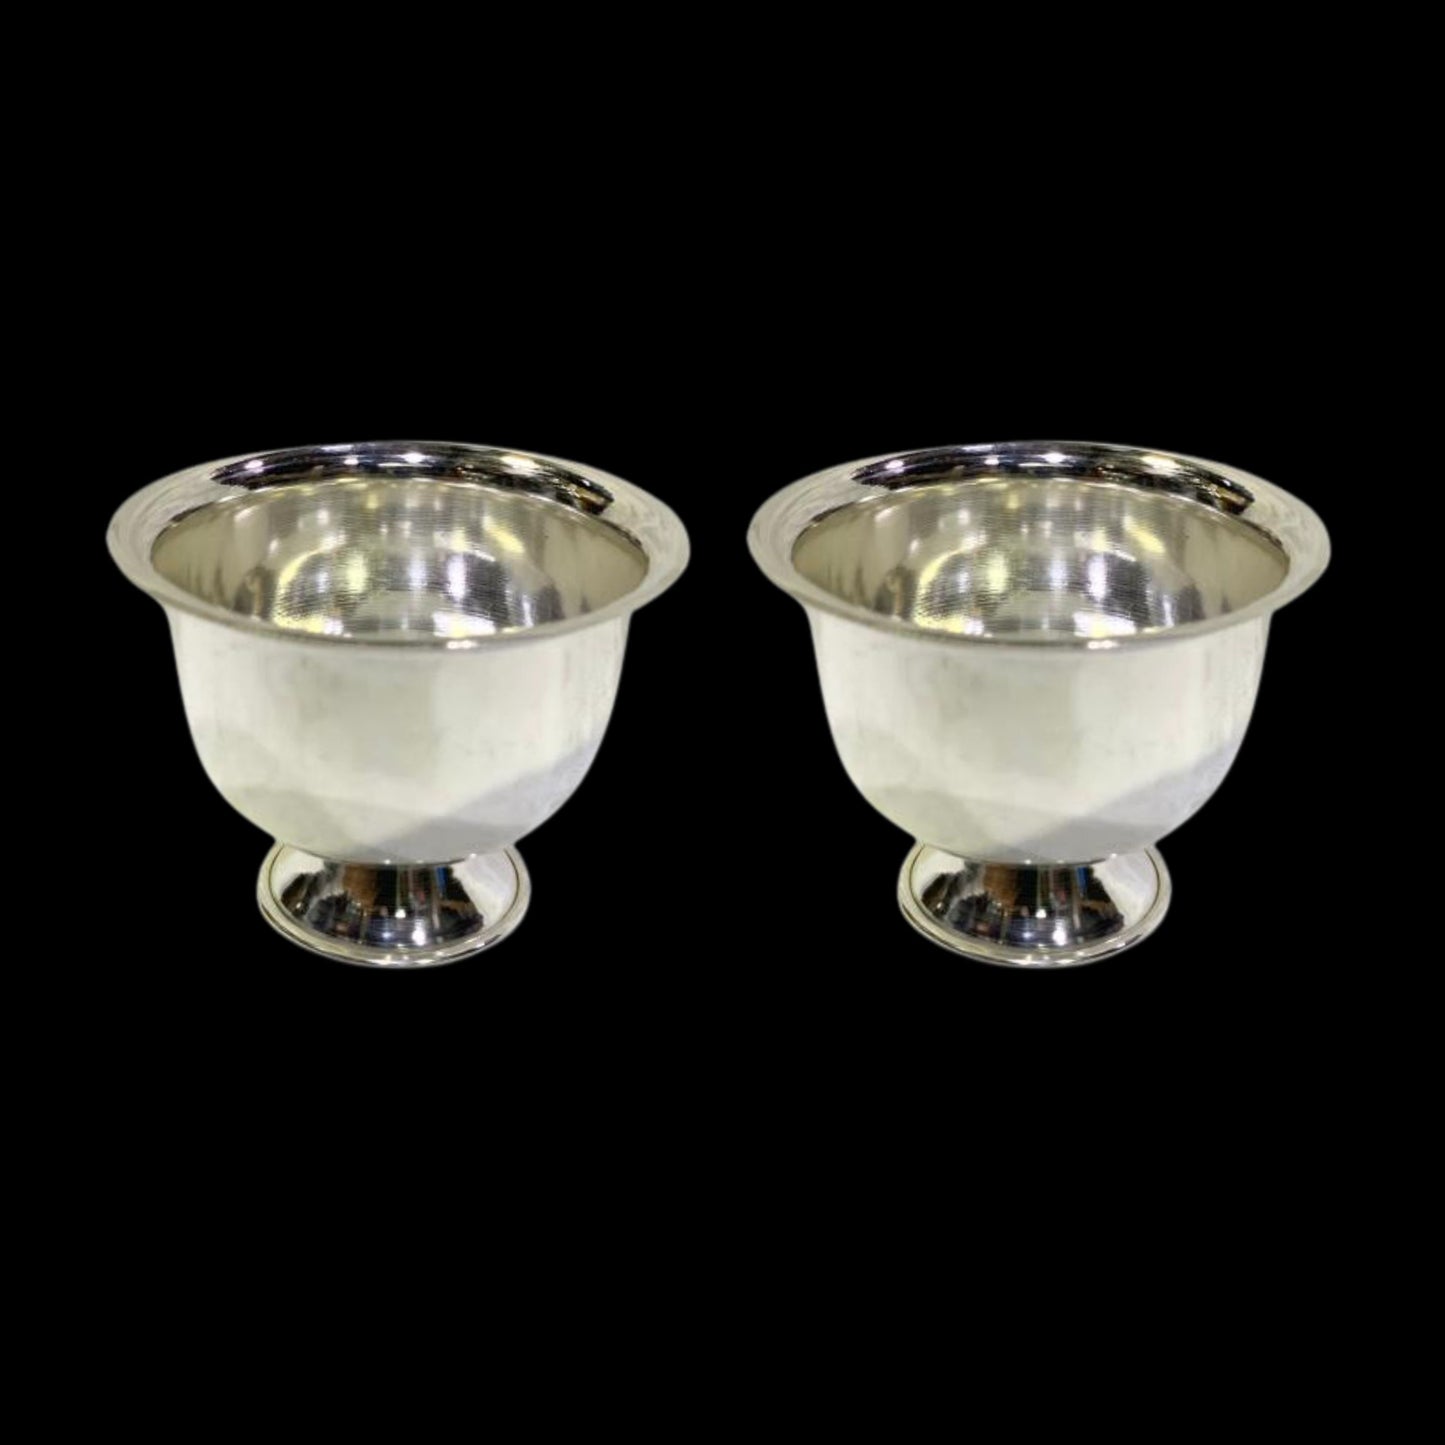 22 gms Pure Silver Padam Cups (Set Of 2) - Mirror Finished